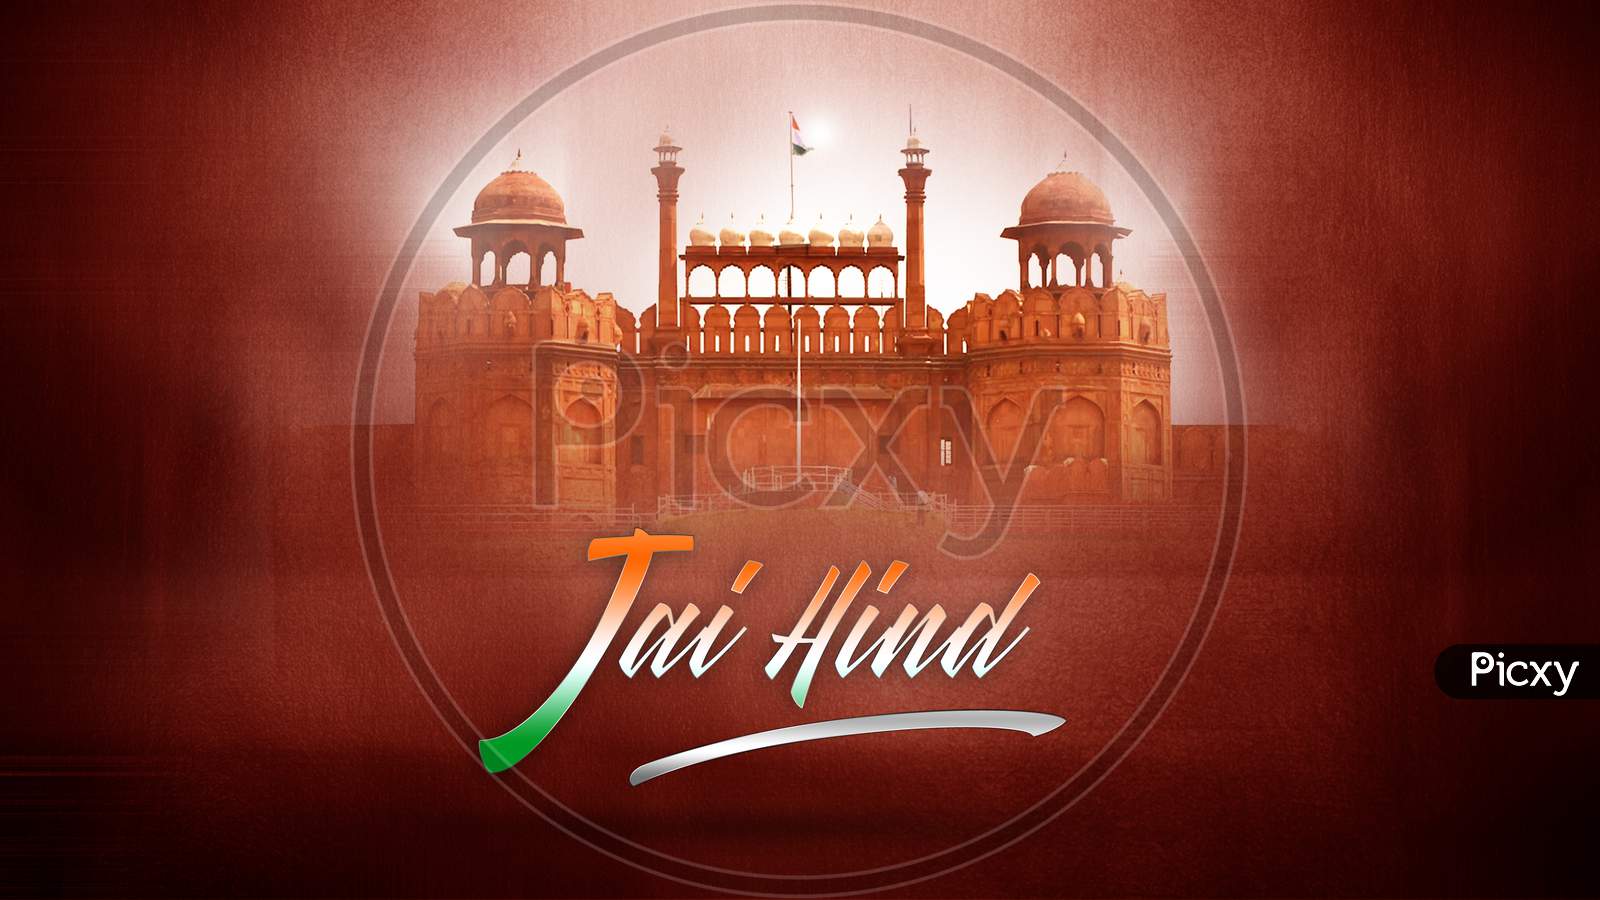 Red Fort Jai hind